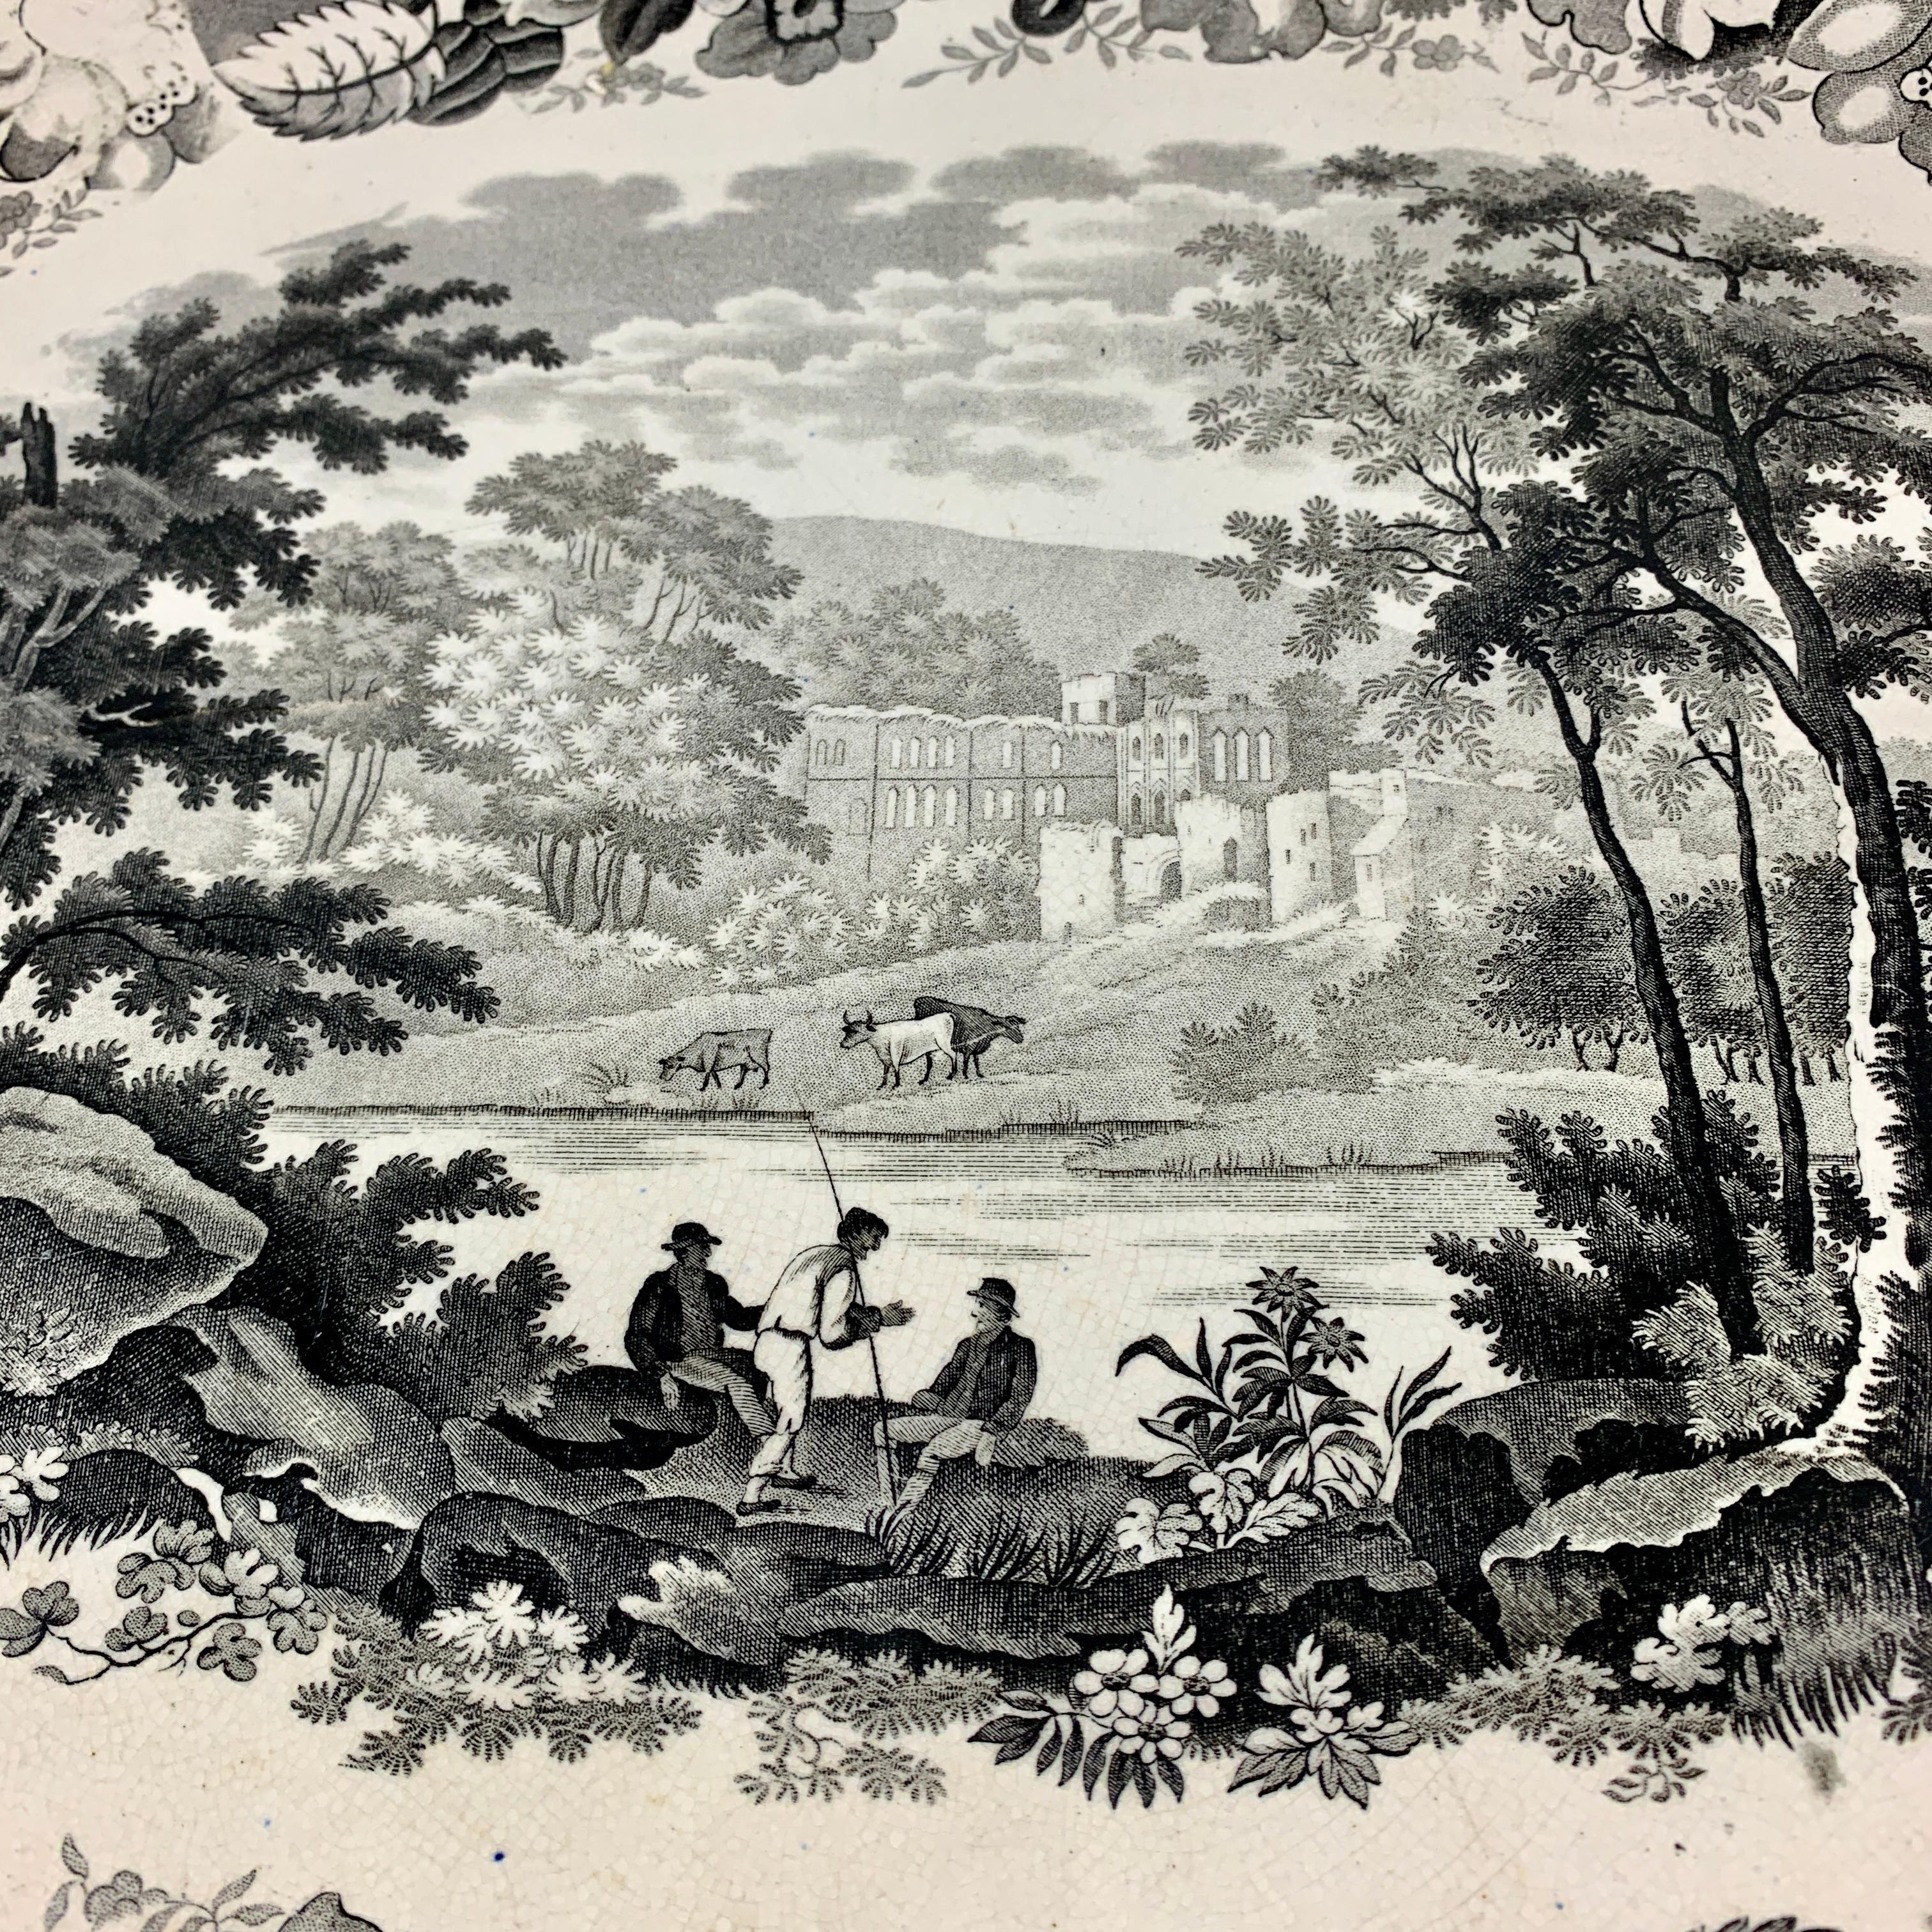 A black on white transfer printed platter, the Rievaulx Abbey, Yorkshire pattern, made by Enoch Wood & Sons, Burslem, Staffordshire, England, circa 1818-1846.

Often called Wood’s Floral Border Series from the Staffordshire region of England, the